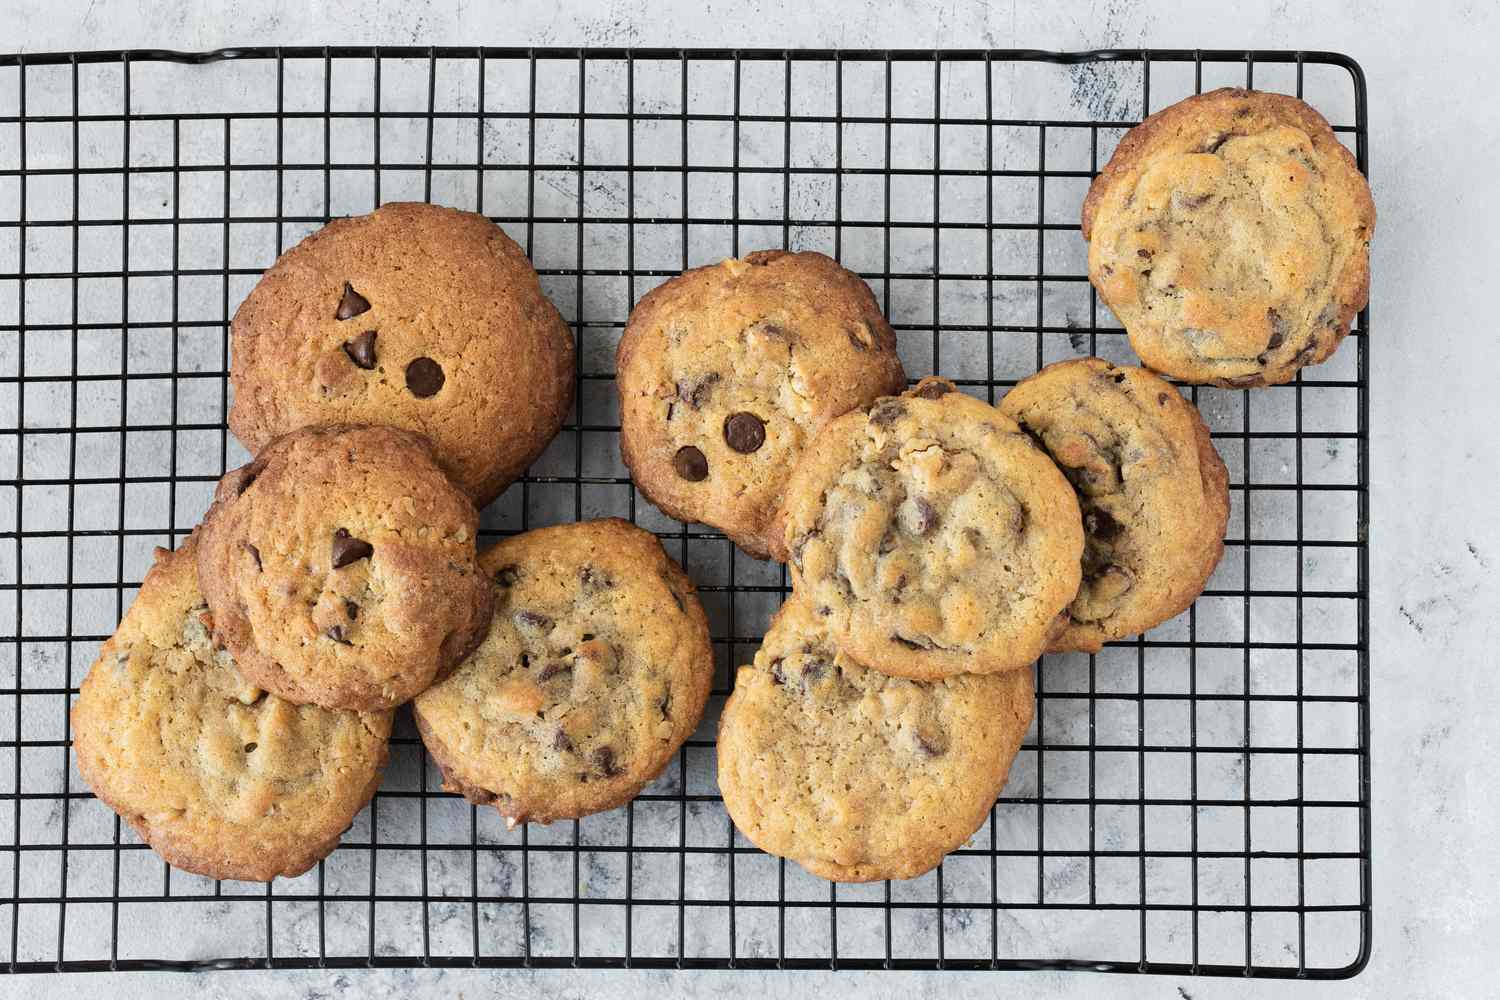 Deep South Dish: Cookie Storage - Keeping Soft Cookies Soft